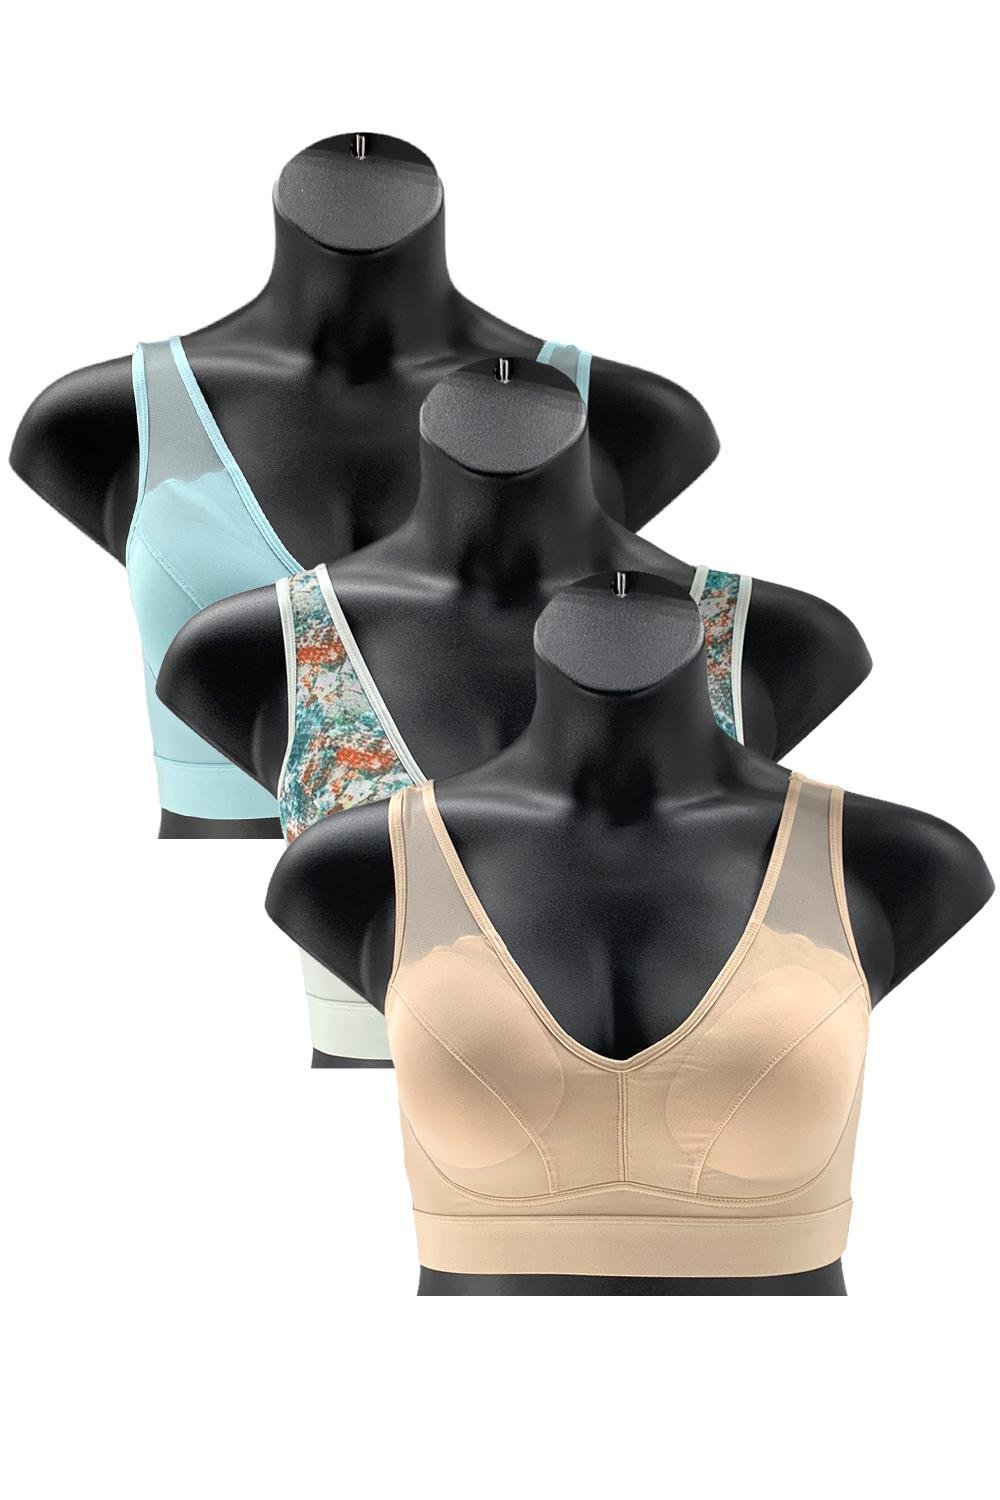 Breezies Full Coverage Molded Cup Two Toned Bra 